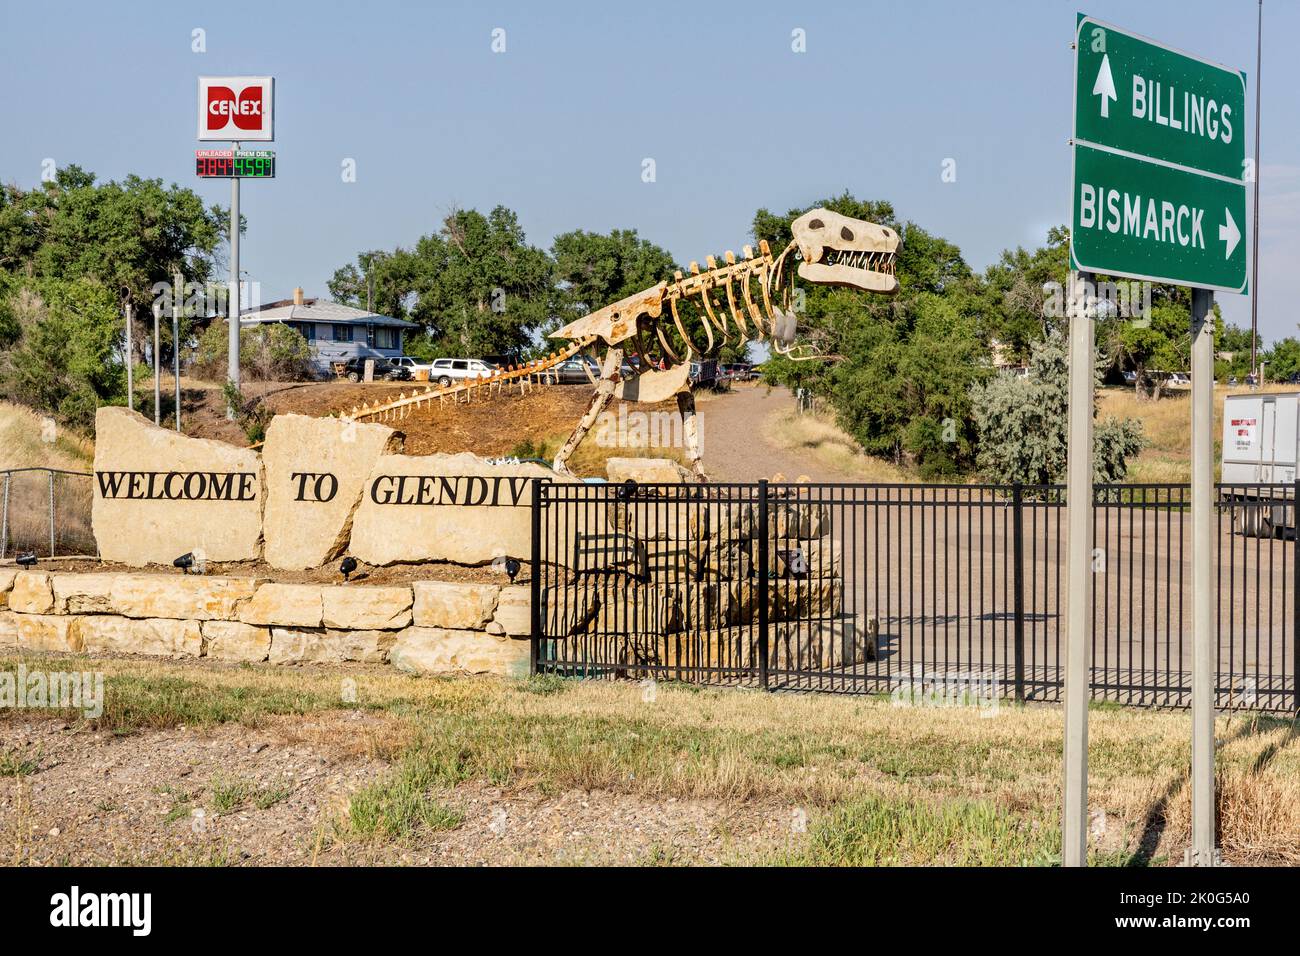 Roadside Welcome to Glendive sign with metal sculpture of a dinosaur in Glendive, Montana.  The sculptures is a tribute to the many dinosaurs bones fo Stock Photo